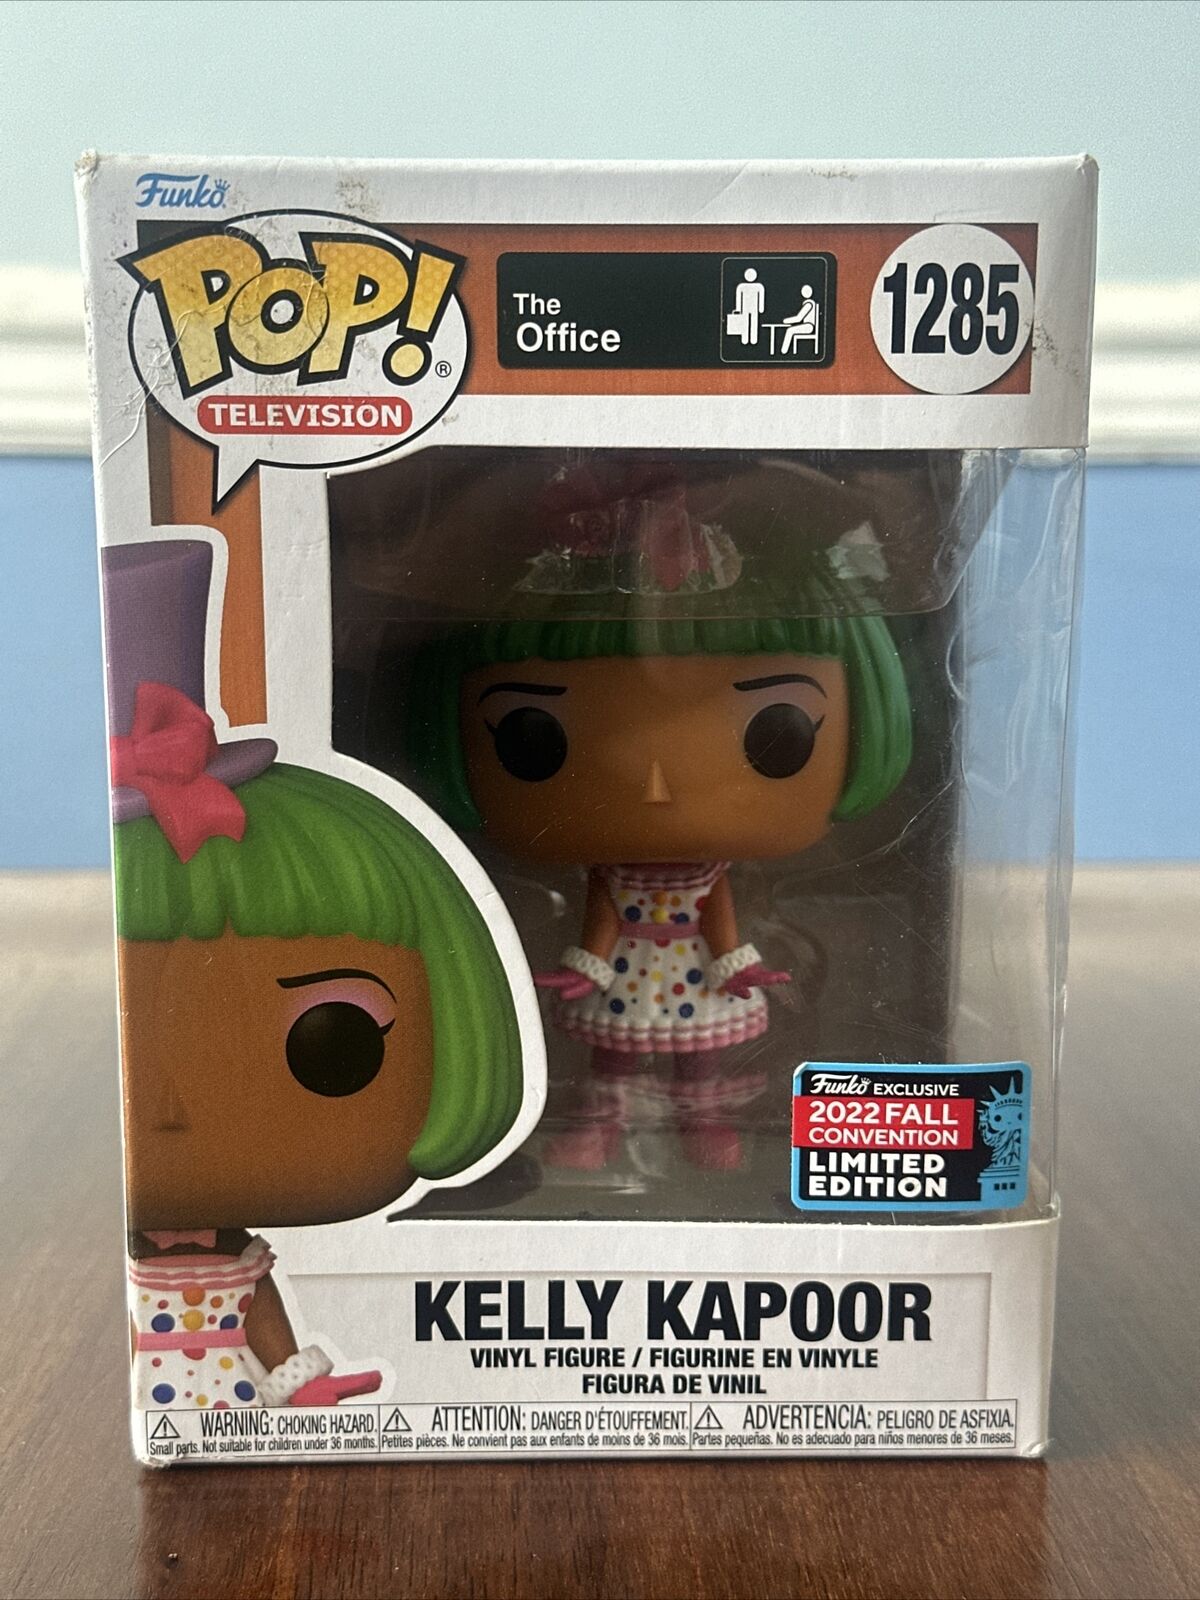 Funko Pop Kelly Kapoor #1285 The Office 2022 Fall Convention Limited Edition